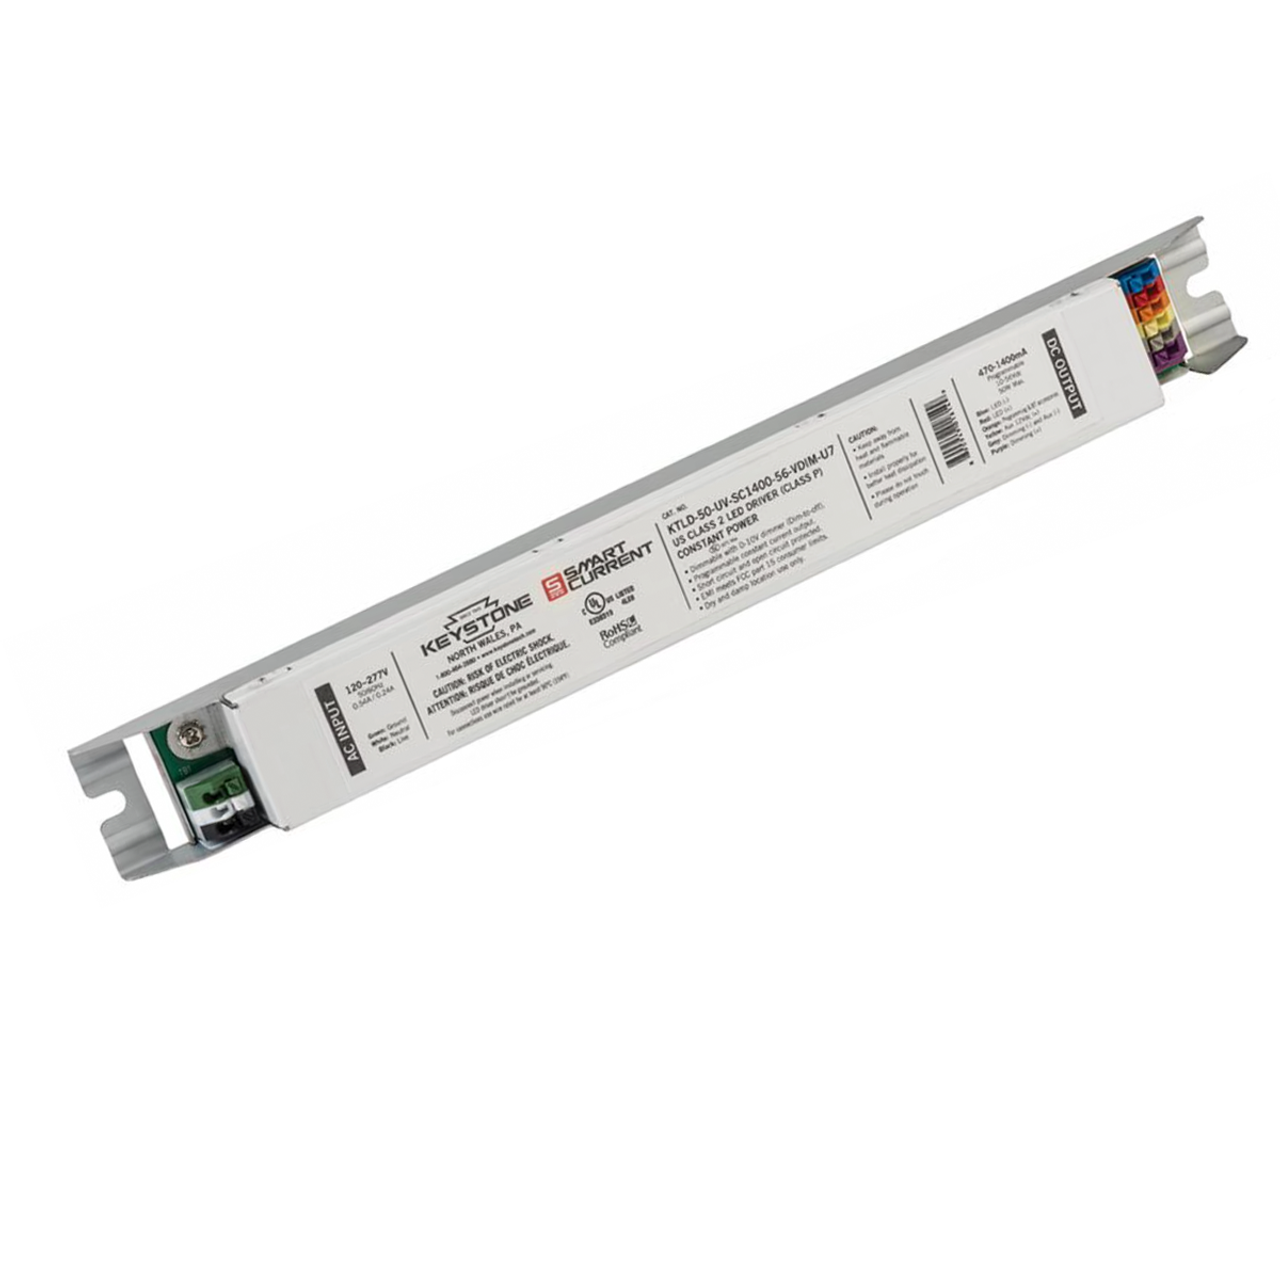 Programmable LED Driver | 1400mA Dimming